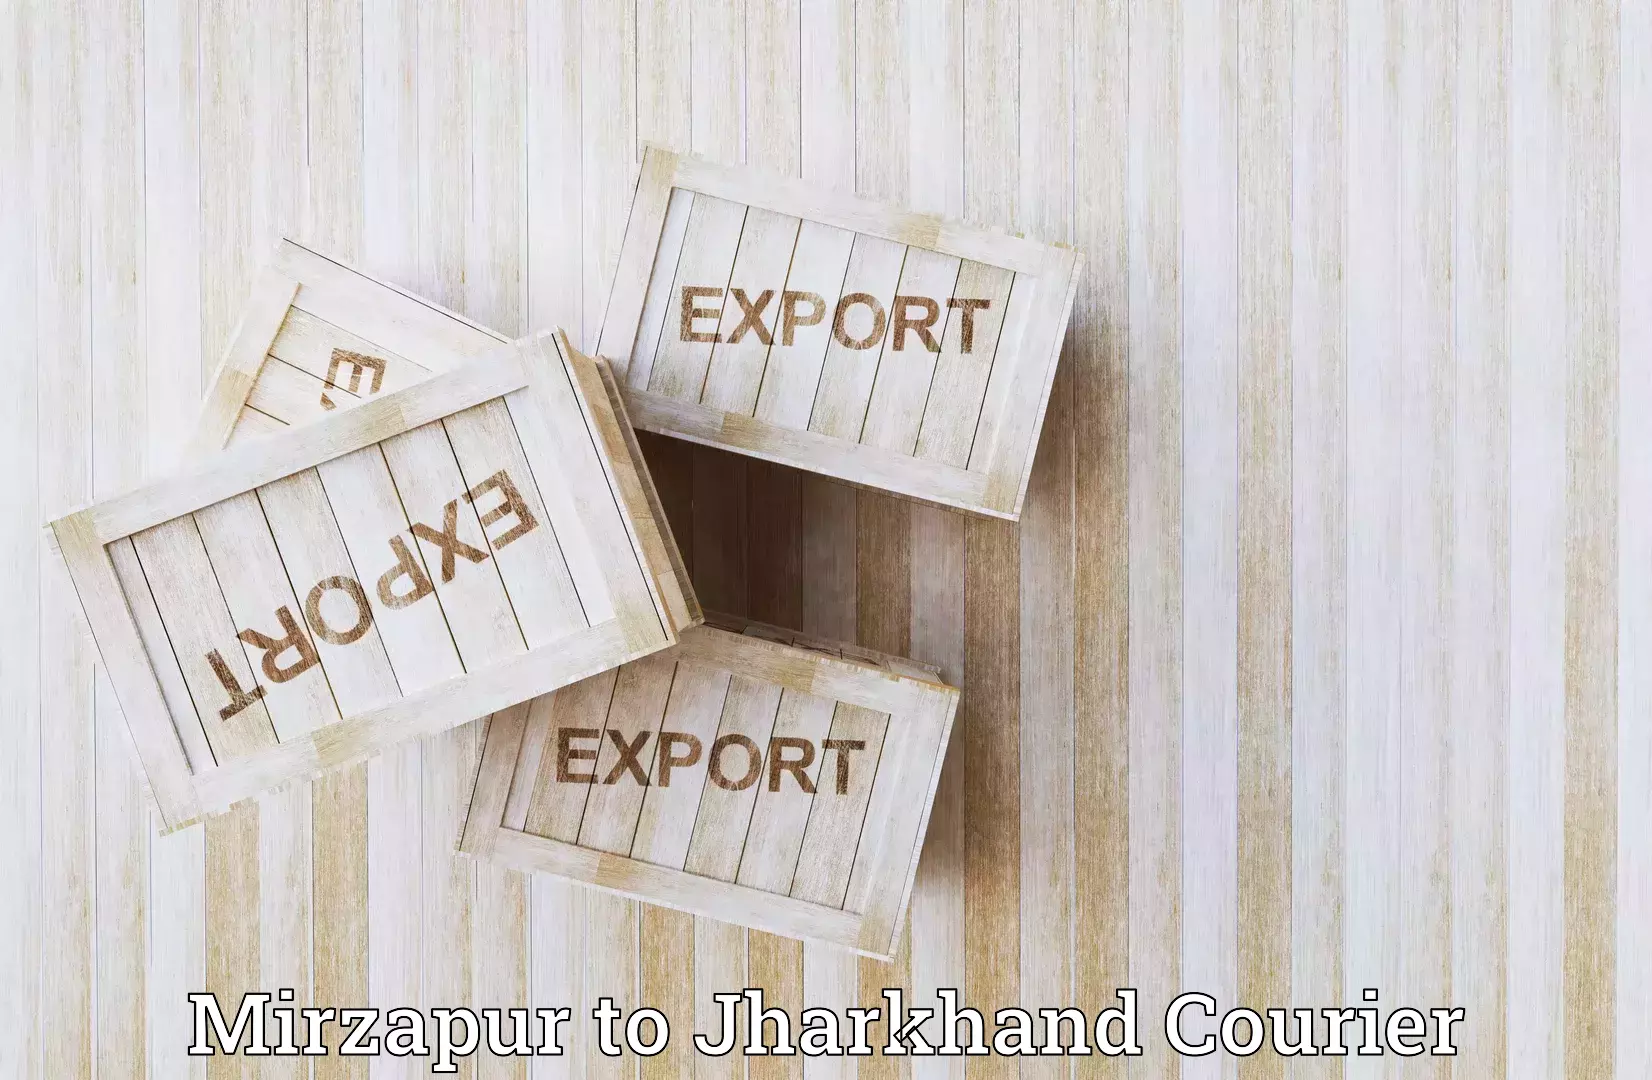 Seamless shipping experience Mirzapur to Chandil